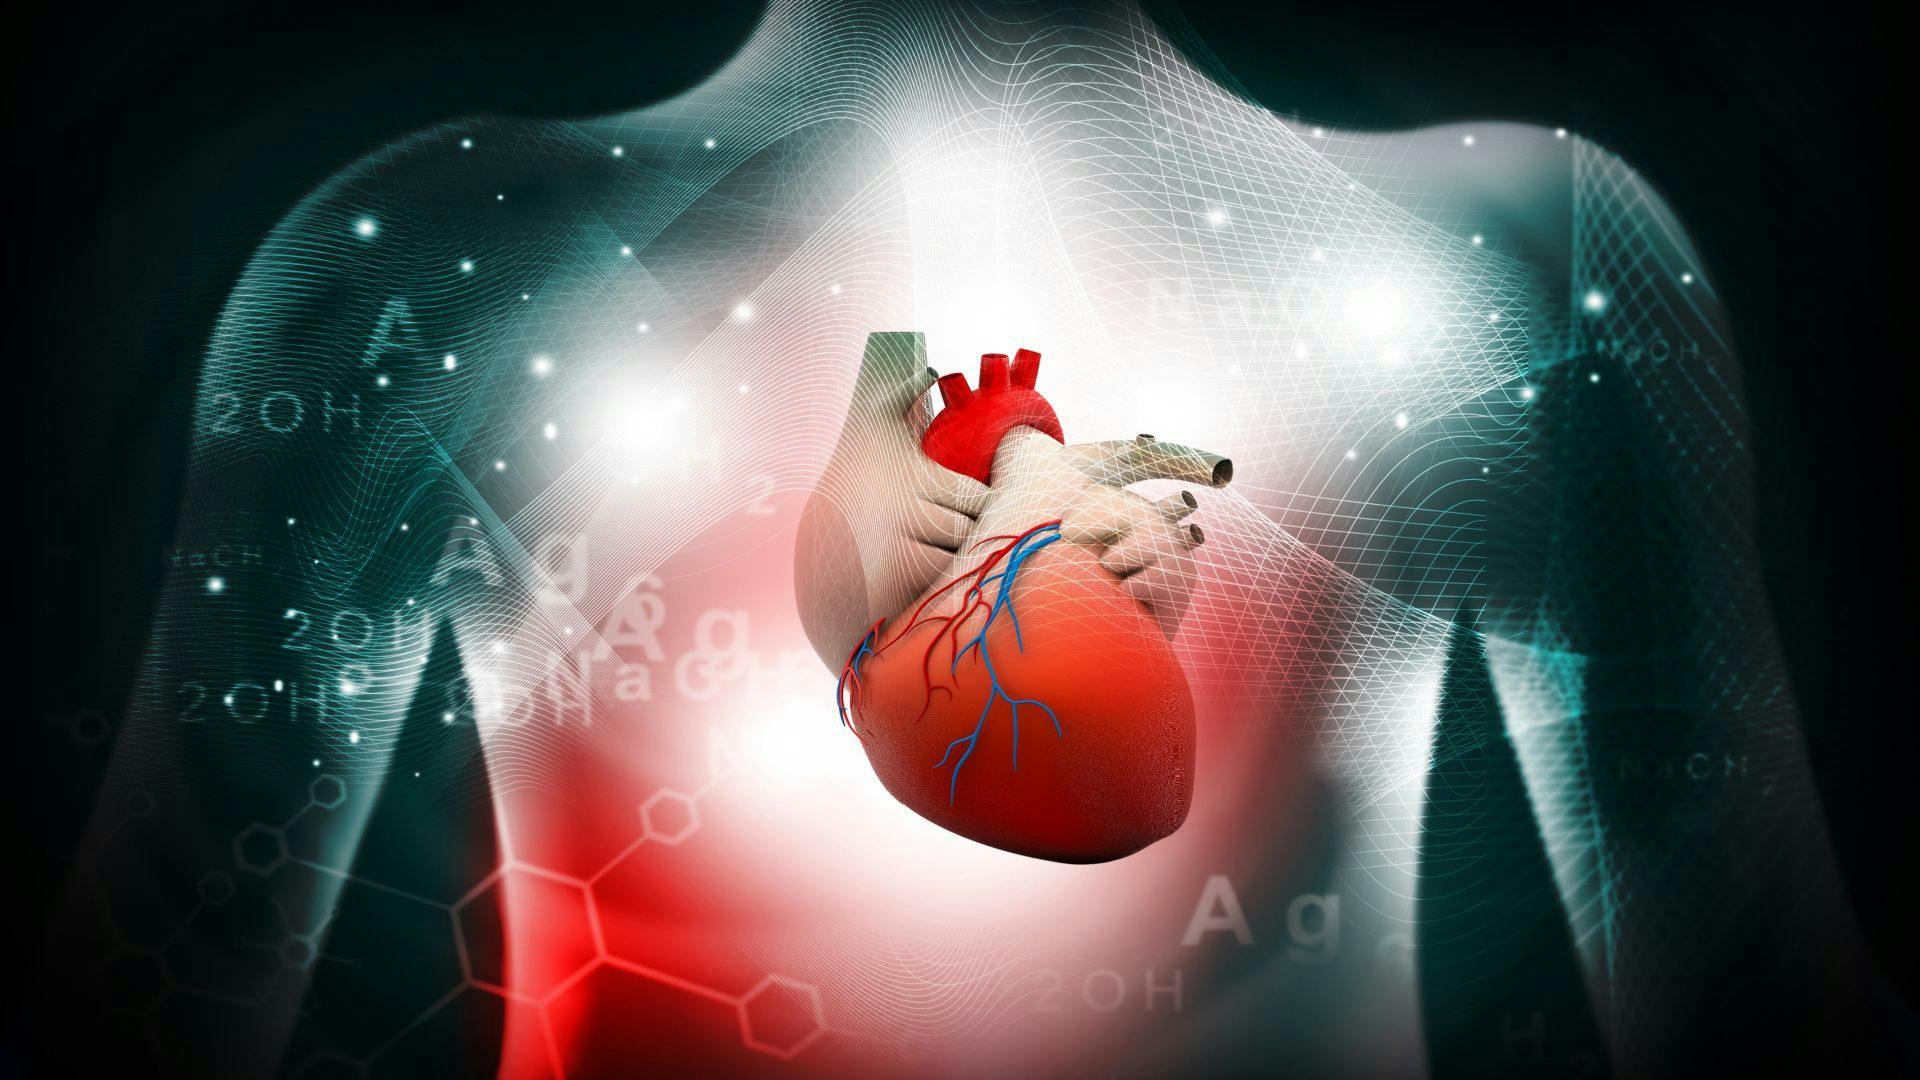 Pneumonia or Sepsis in Adults Associated With Increased Risk of Cardiovascular Disease